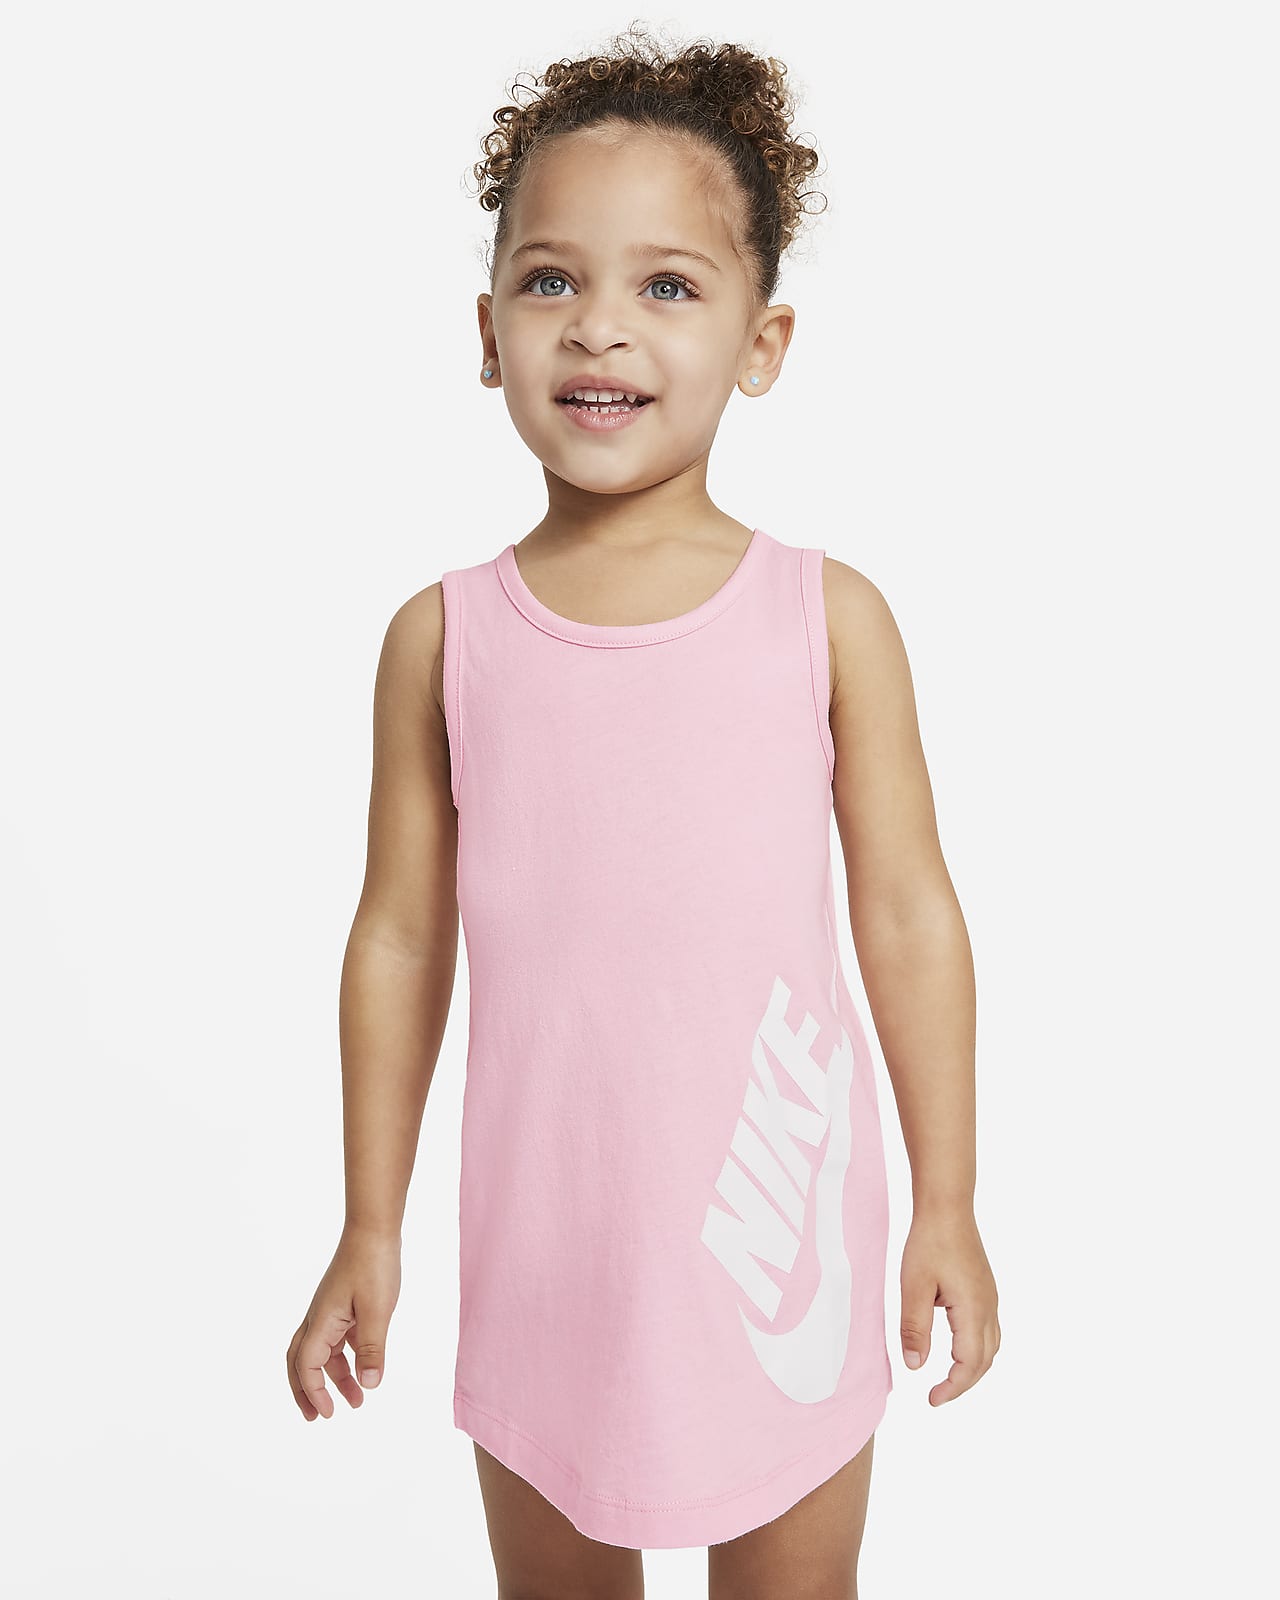 pink and white nike dress